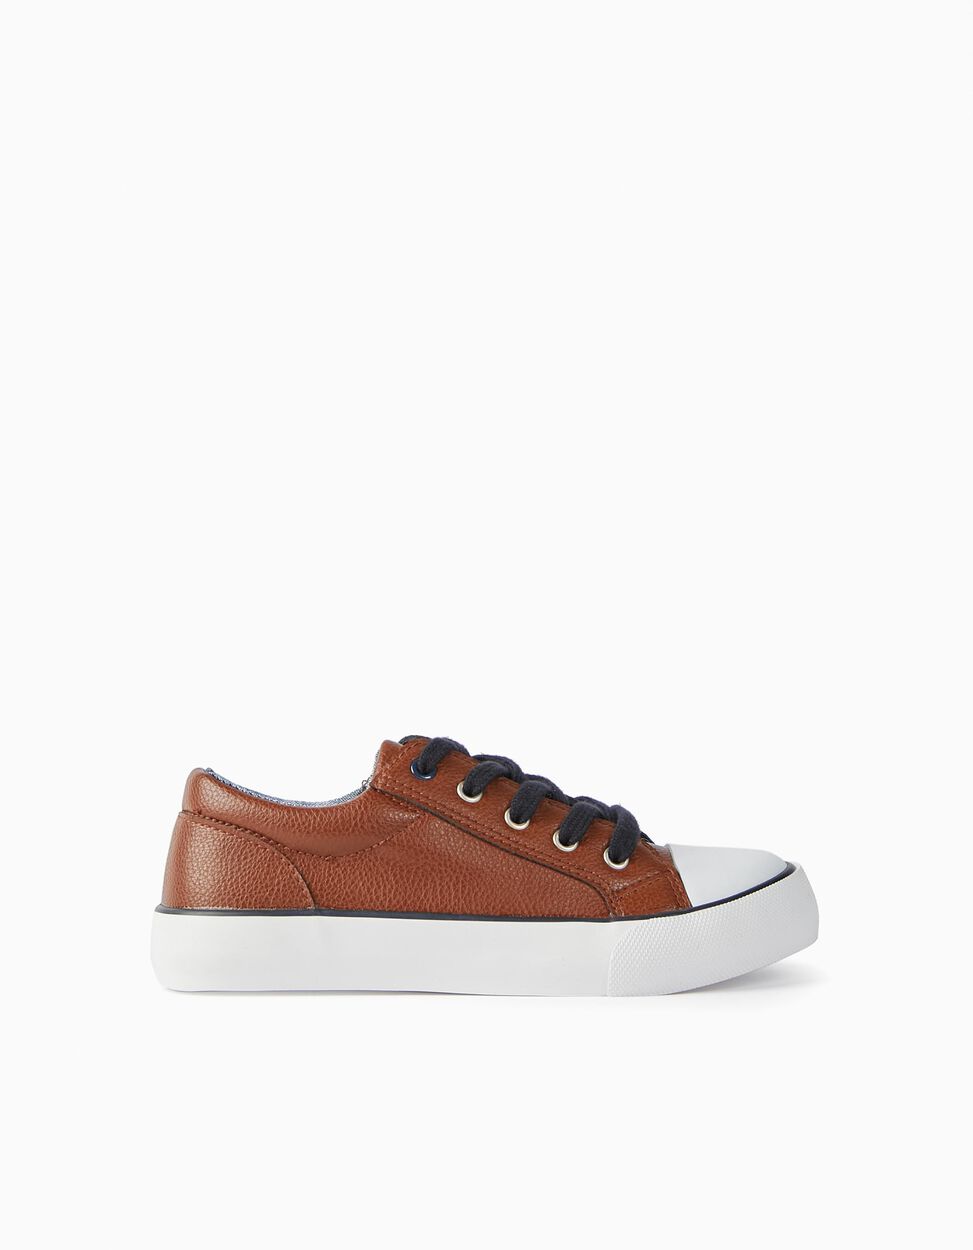 Zippy Trainers For Boys, Brown